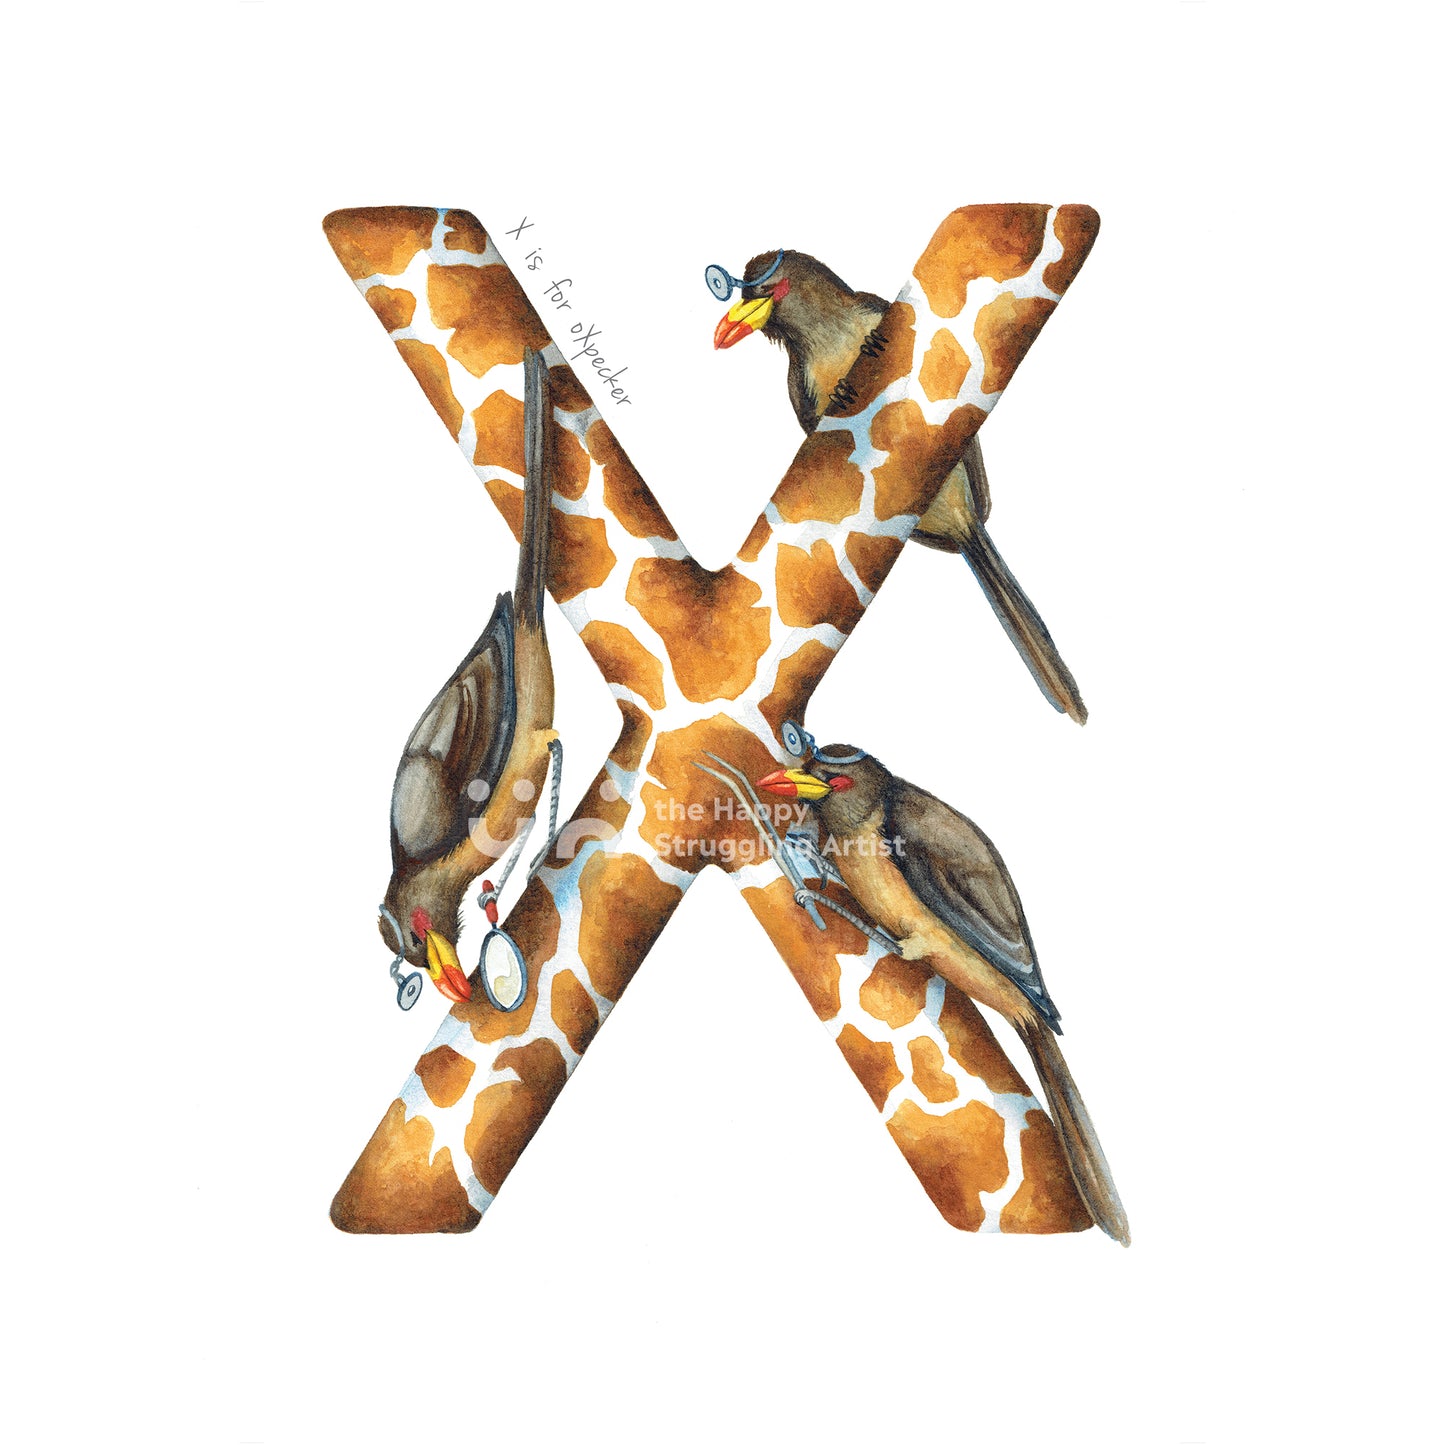 X is for oXpecker